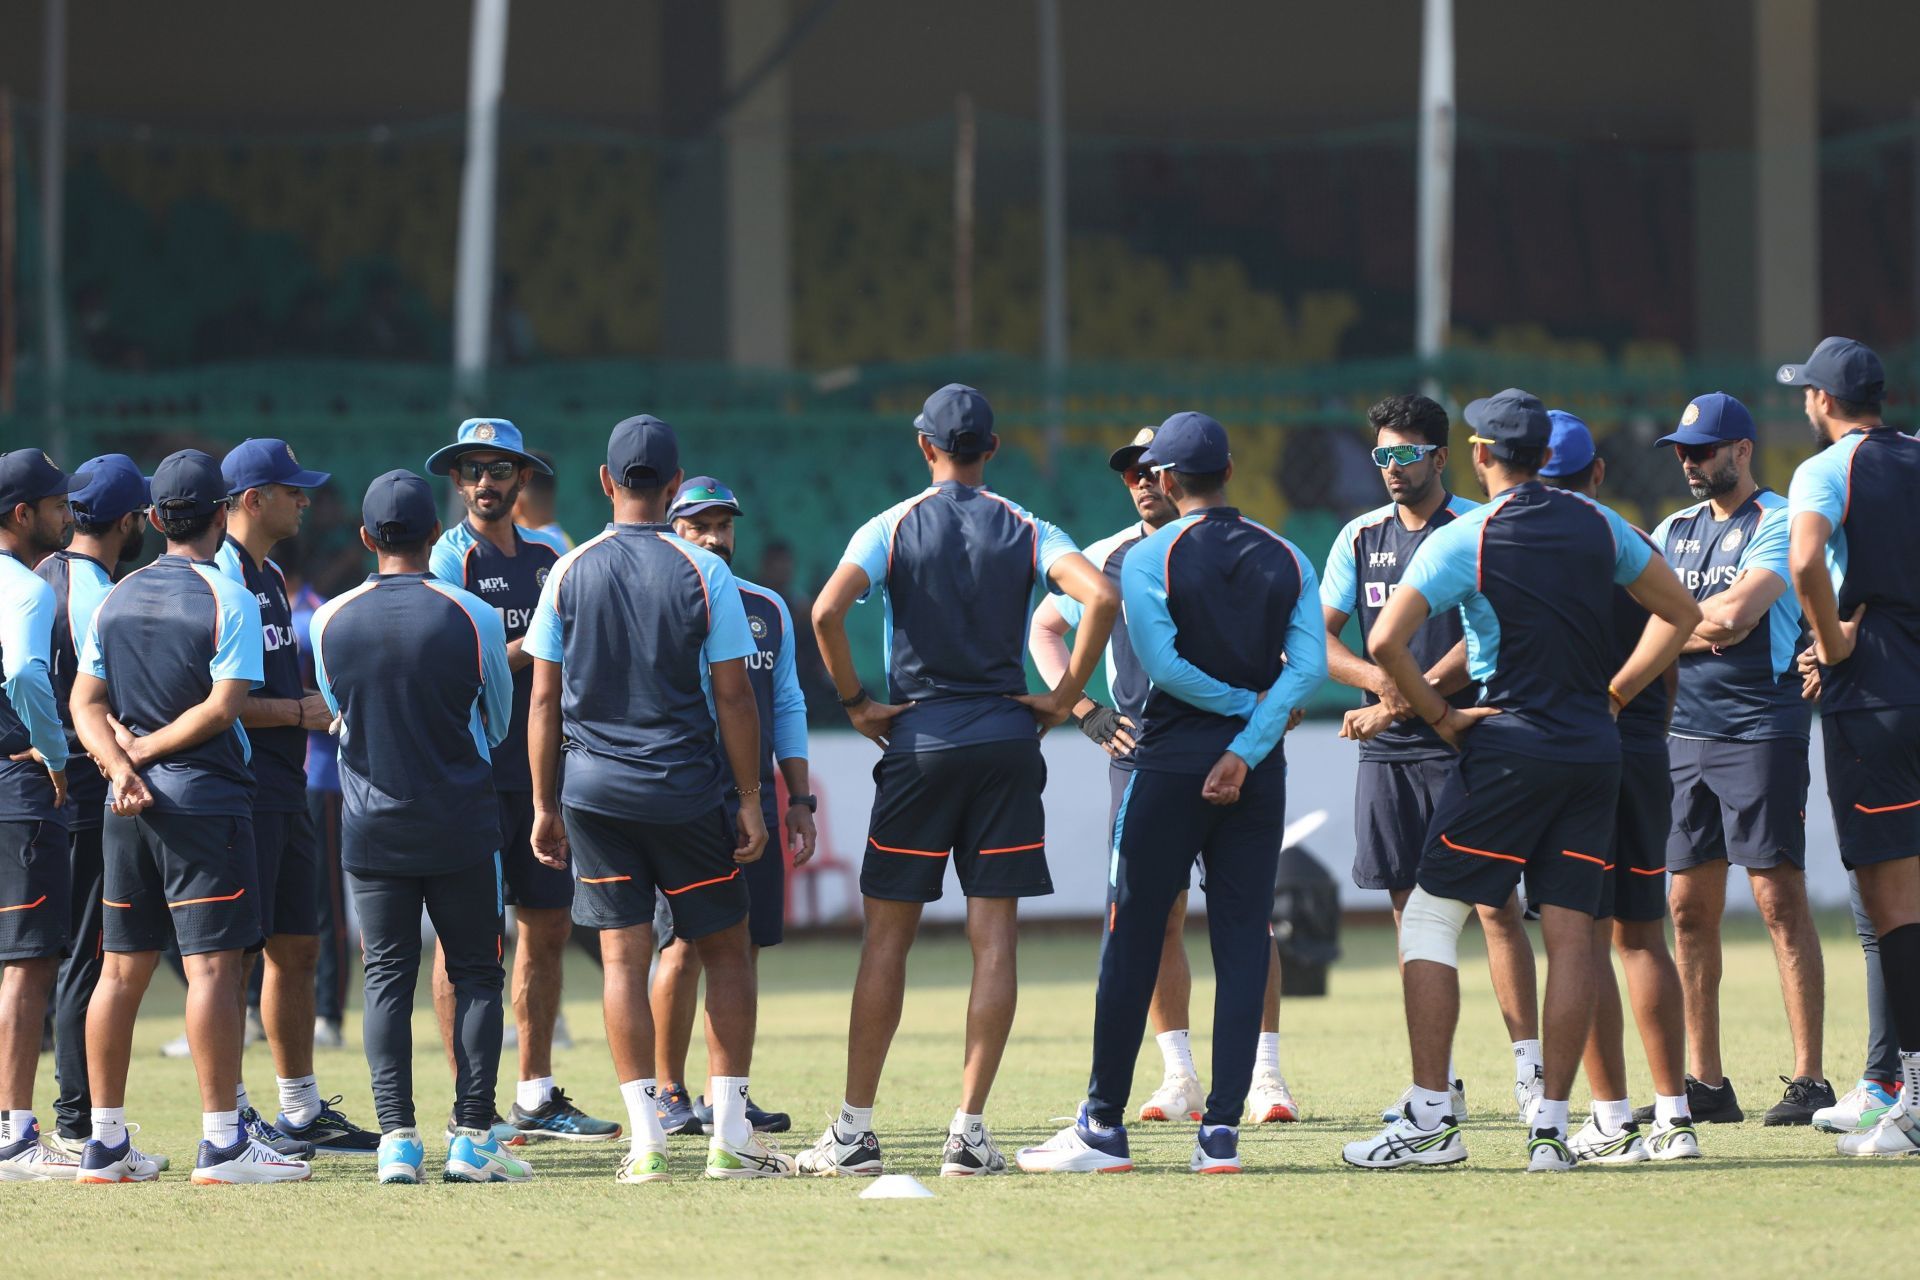 Team India players during a practice session in Kanpur. (PC: BCCI)